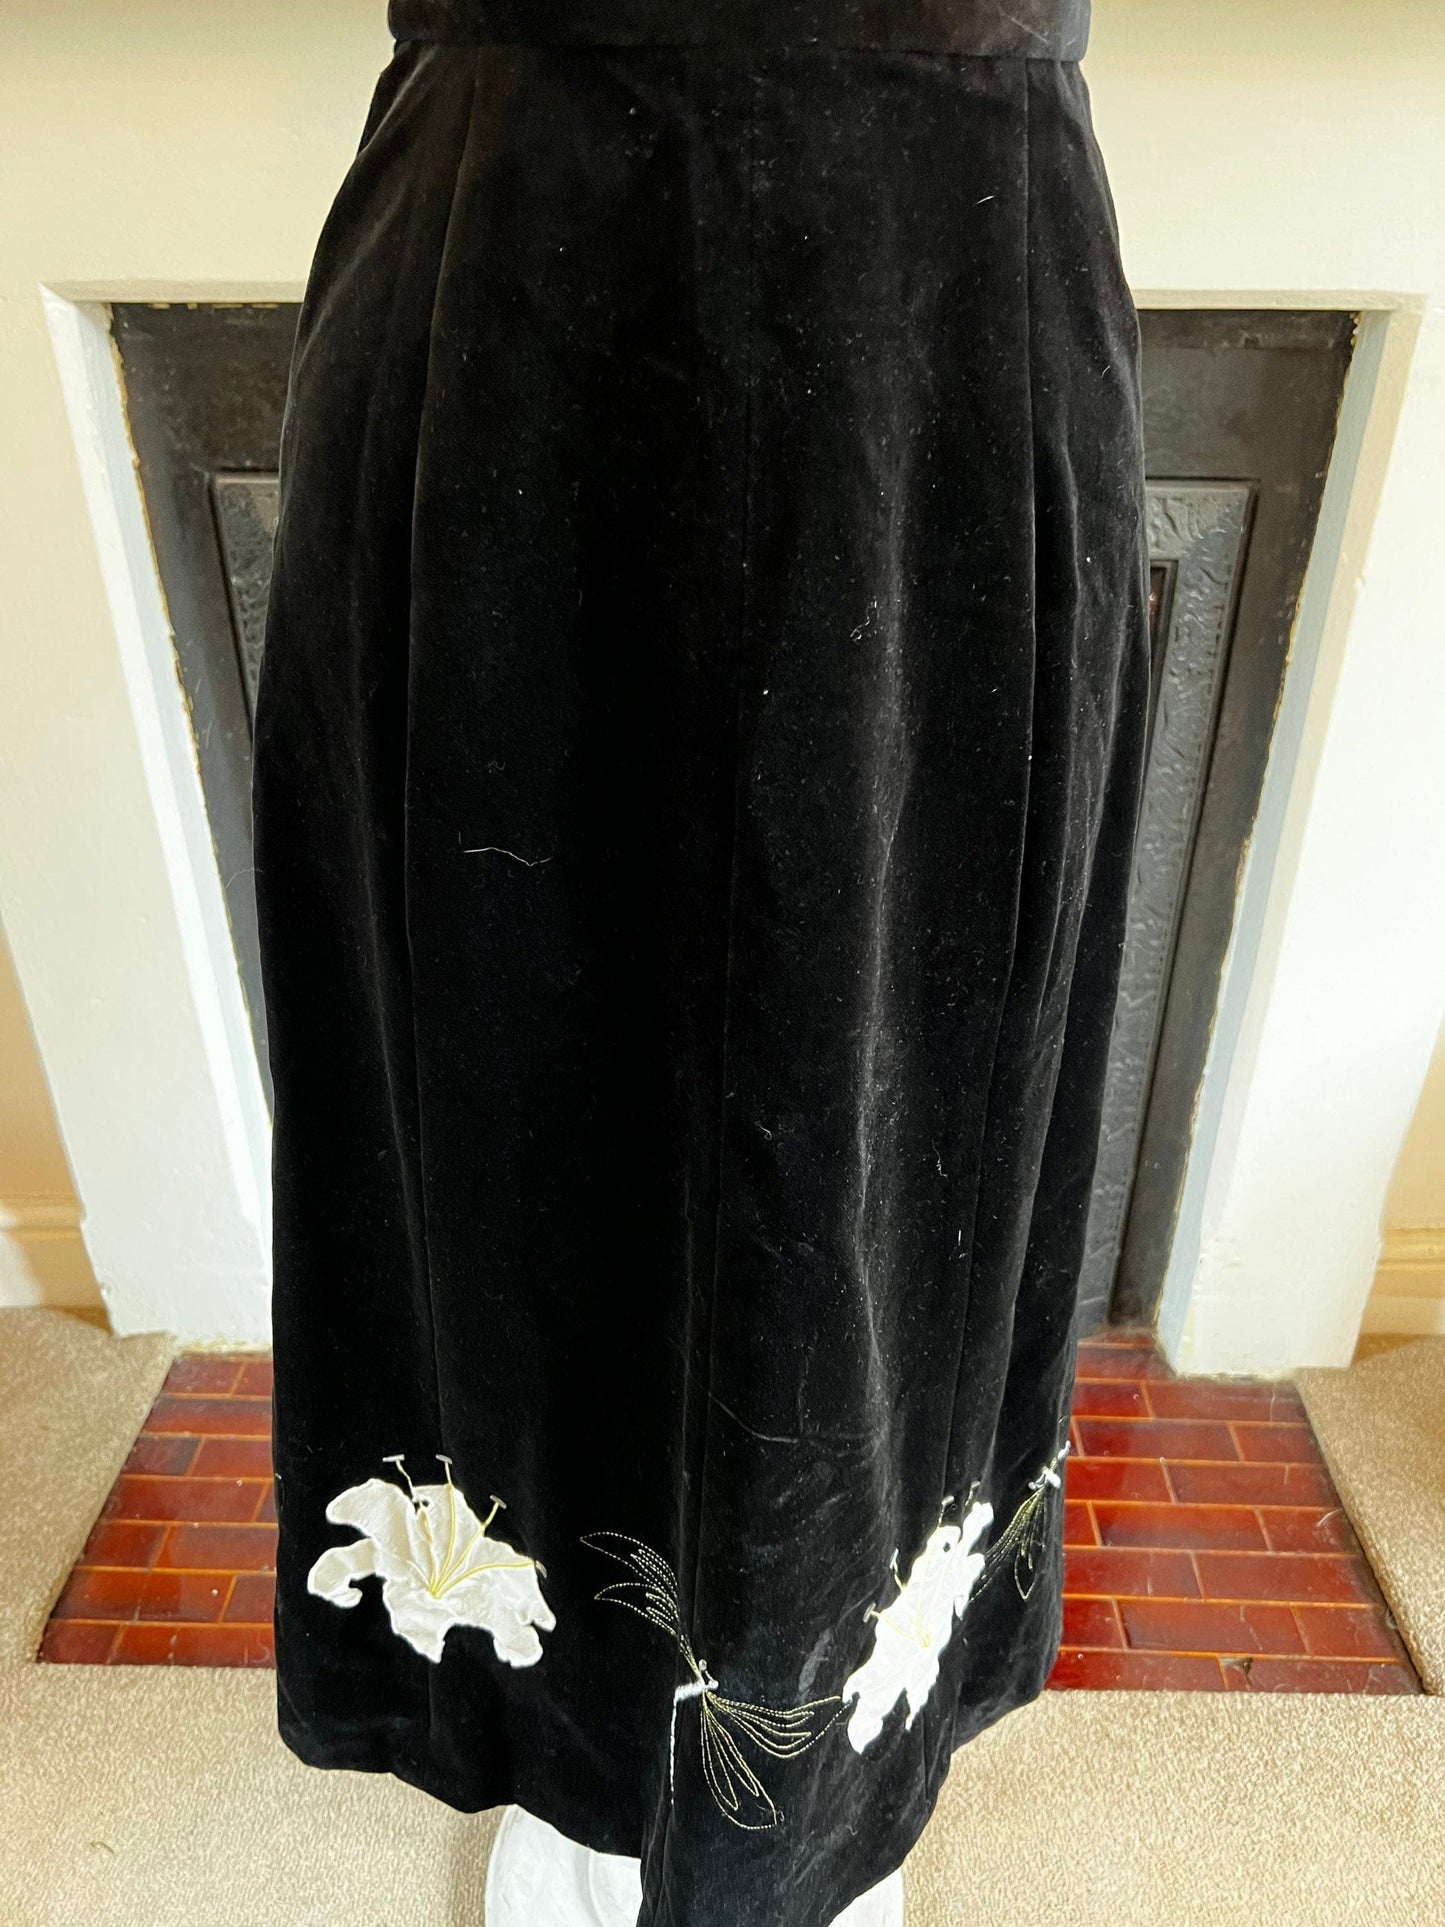 Vintage Velvet Skirt Midi Length Black With Lillies and Dragonfly patterns  UK Size 8 - Needs New Zip